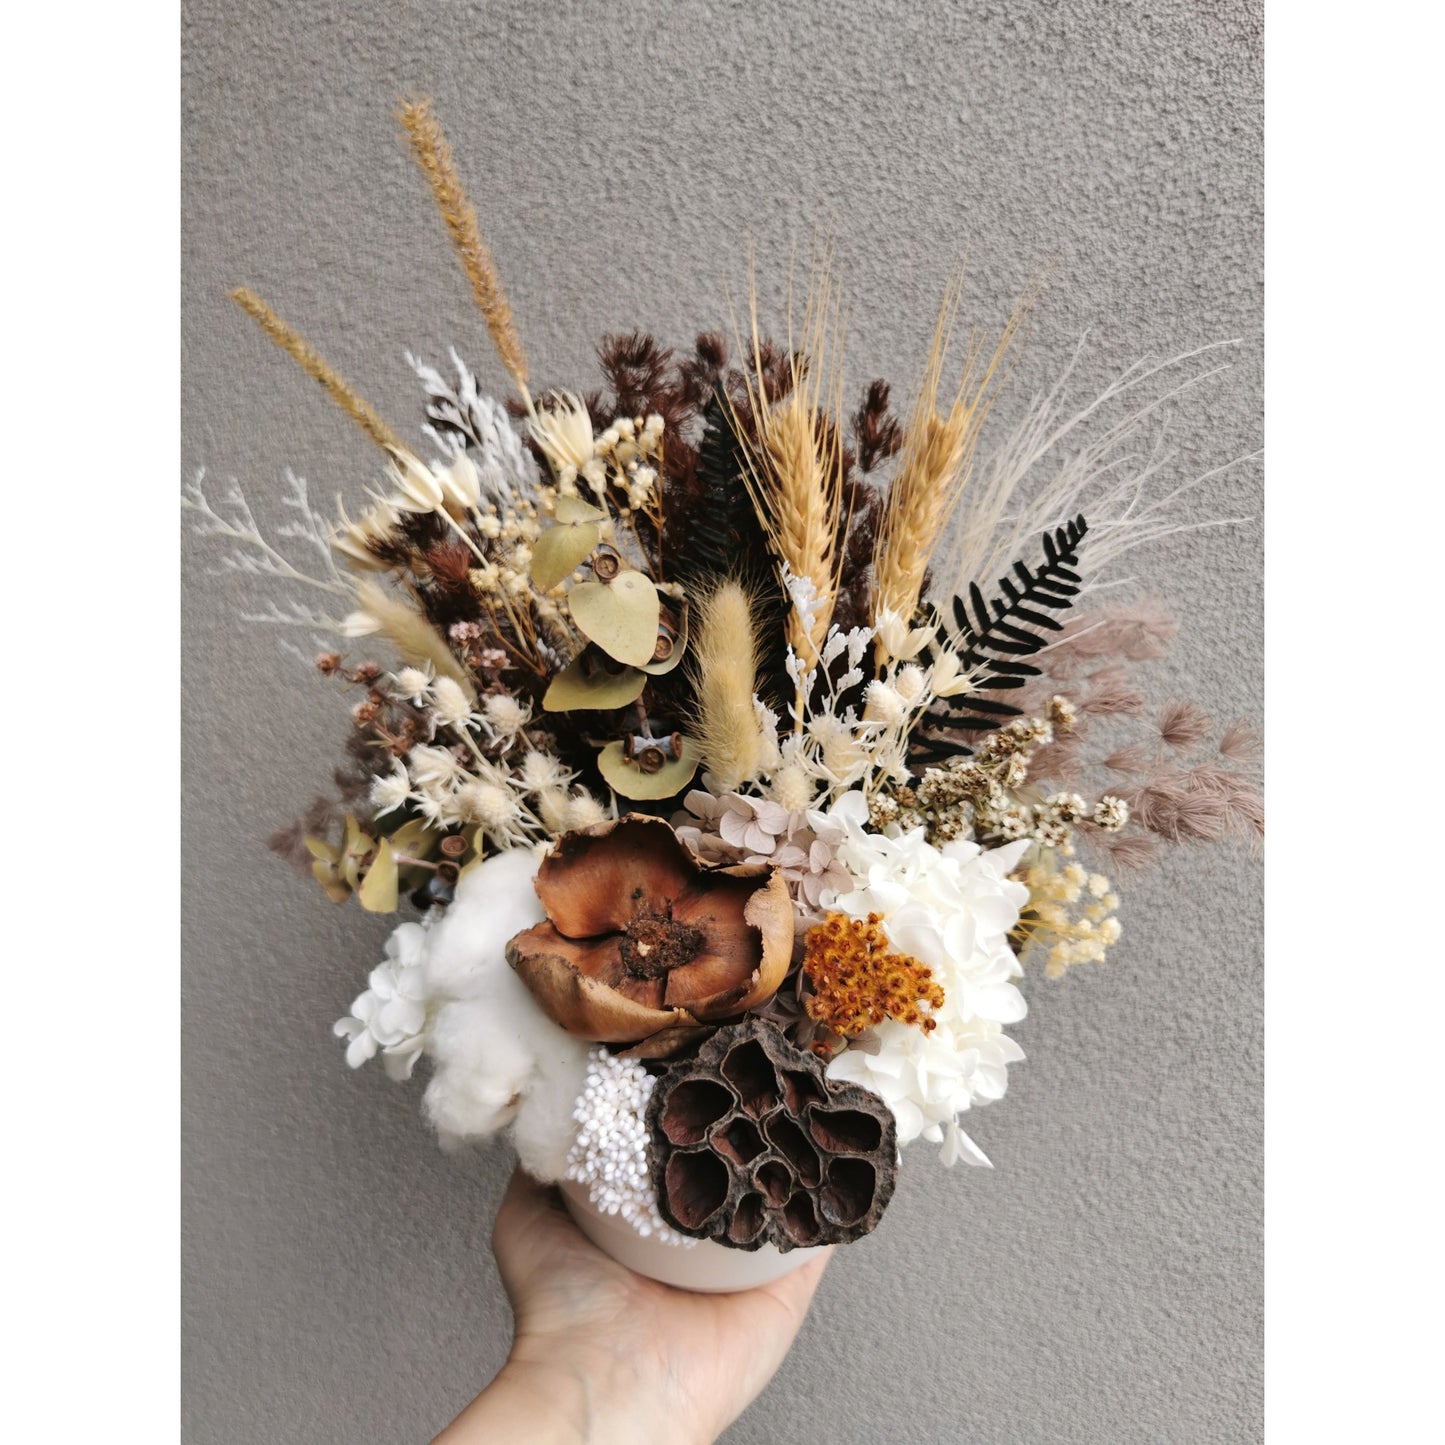 Dried & Preserved native flower arrangement in white pot. Picture shows flower arrangement being held up by hand against a blank wall and held at an angle